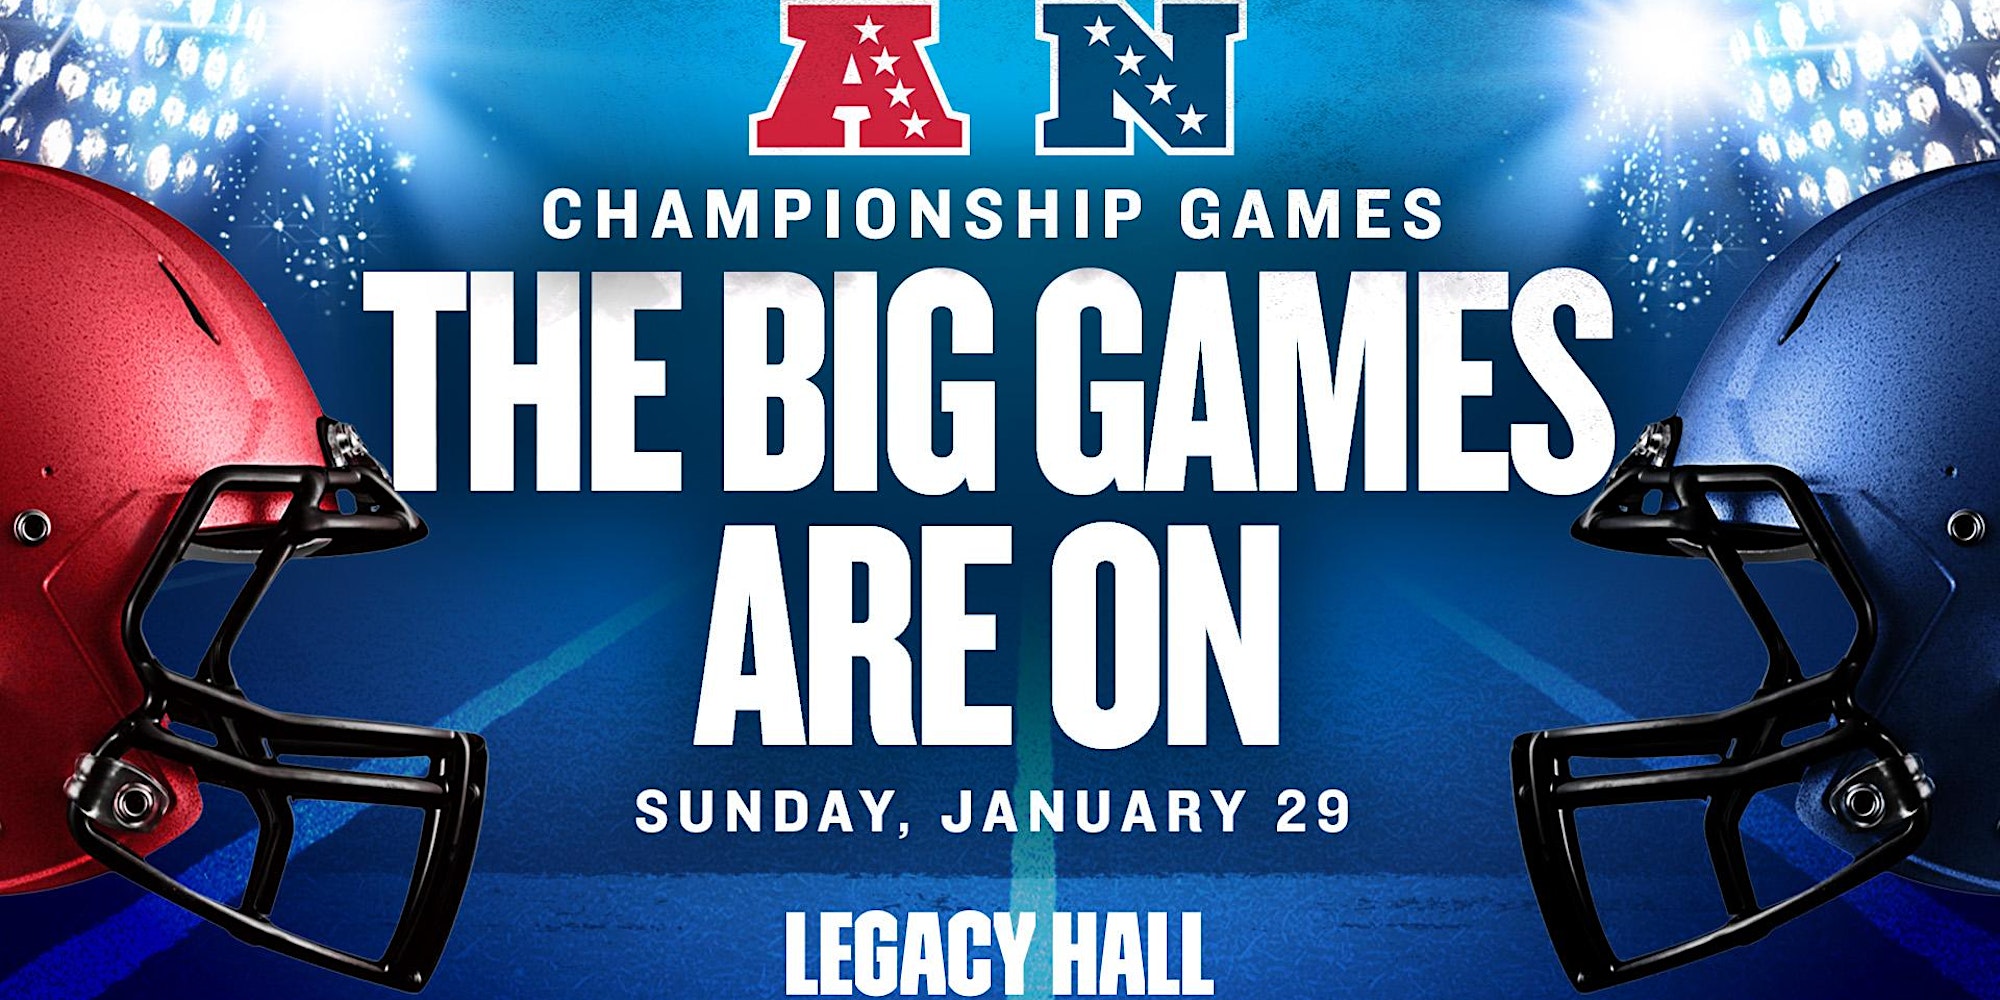 The Big Game at Legacy Hall